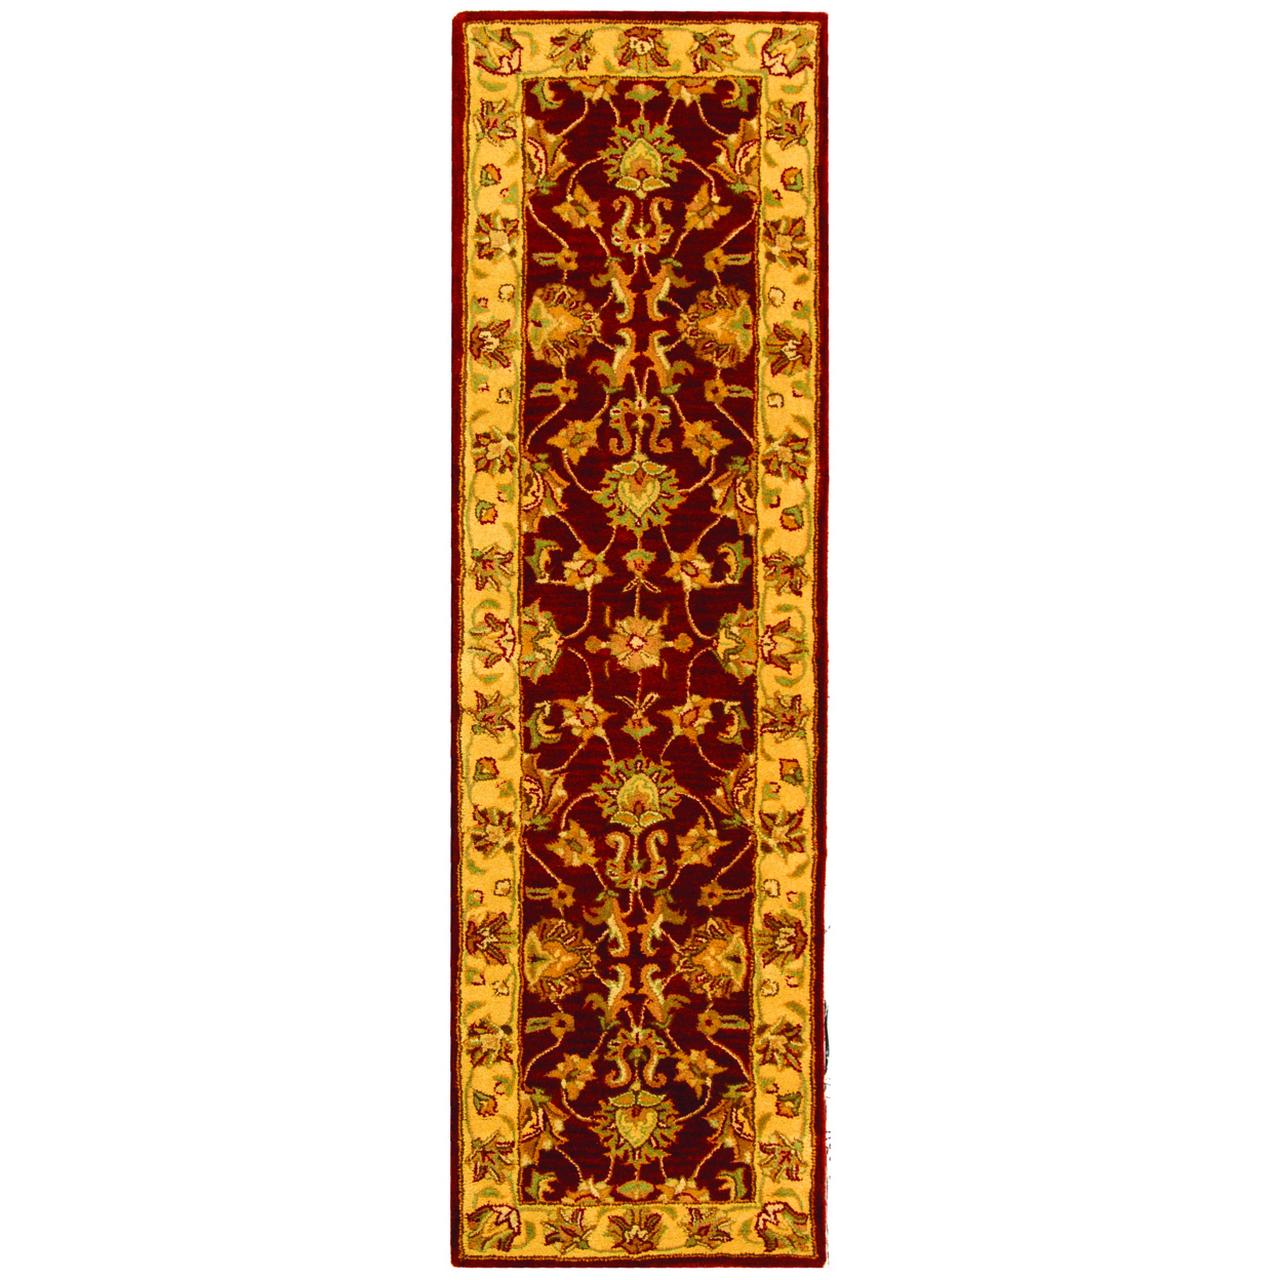 SAFAVIEH Heritage Regis Traditional Wool Area Rug, Red/Gold, 5' x 8' - image 5 of 10